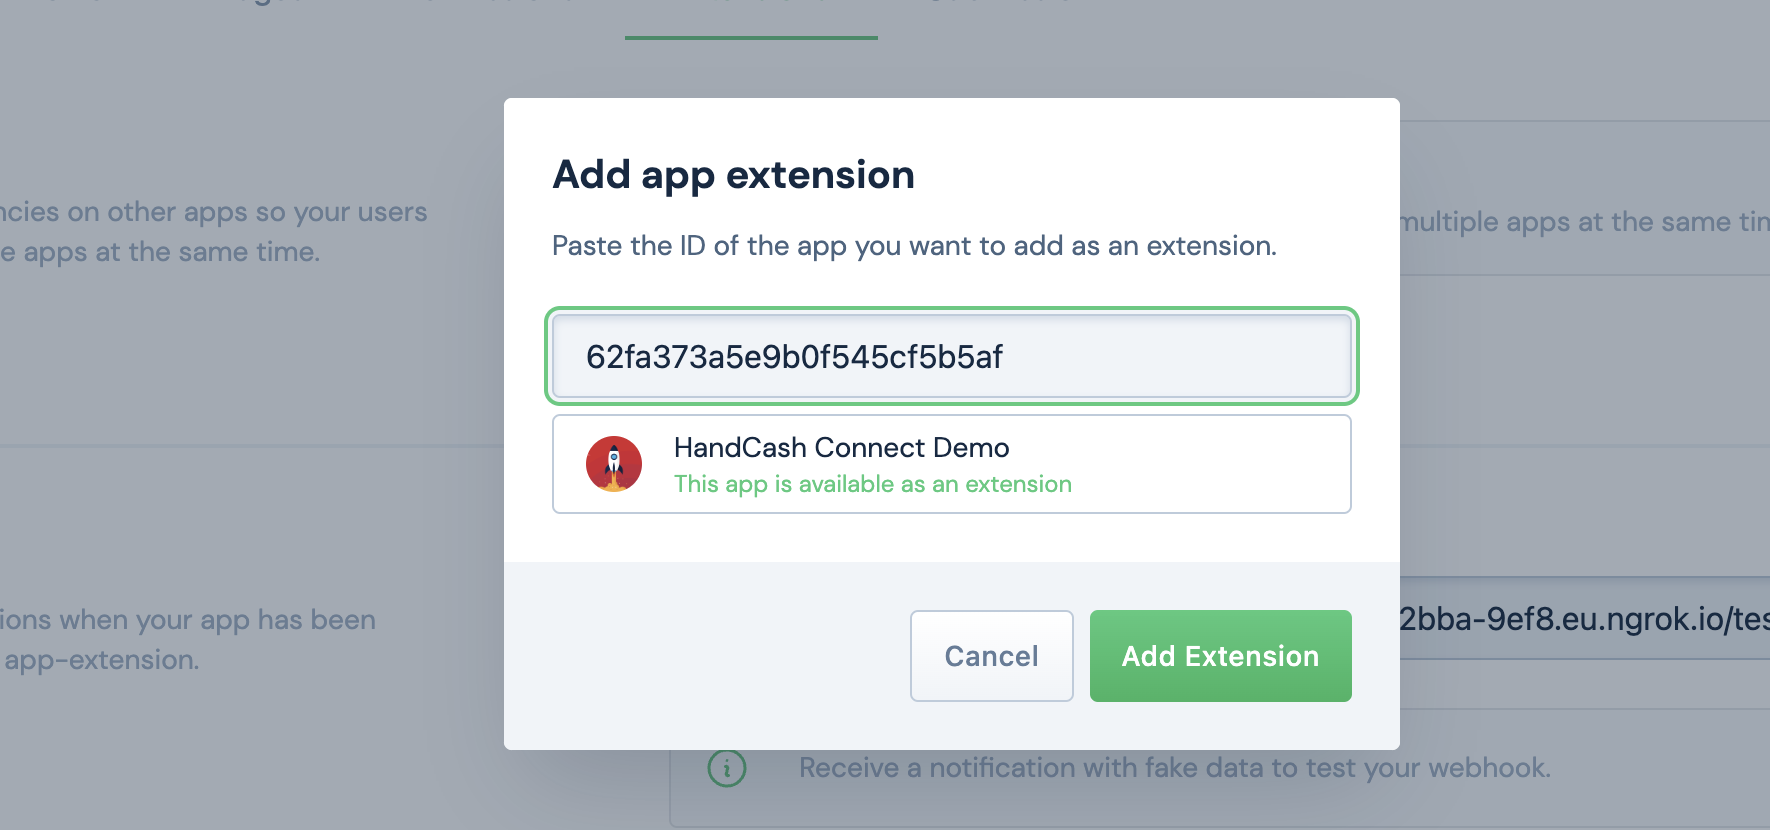 Add extension dialog preview from the dashboard.